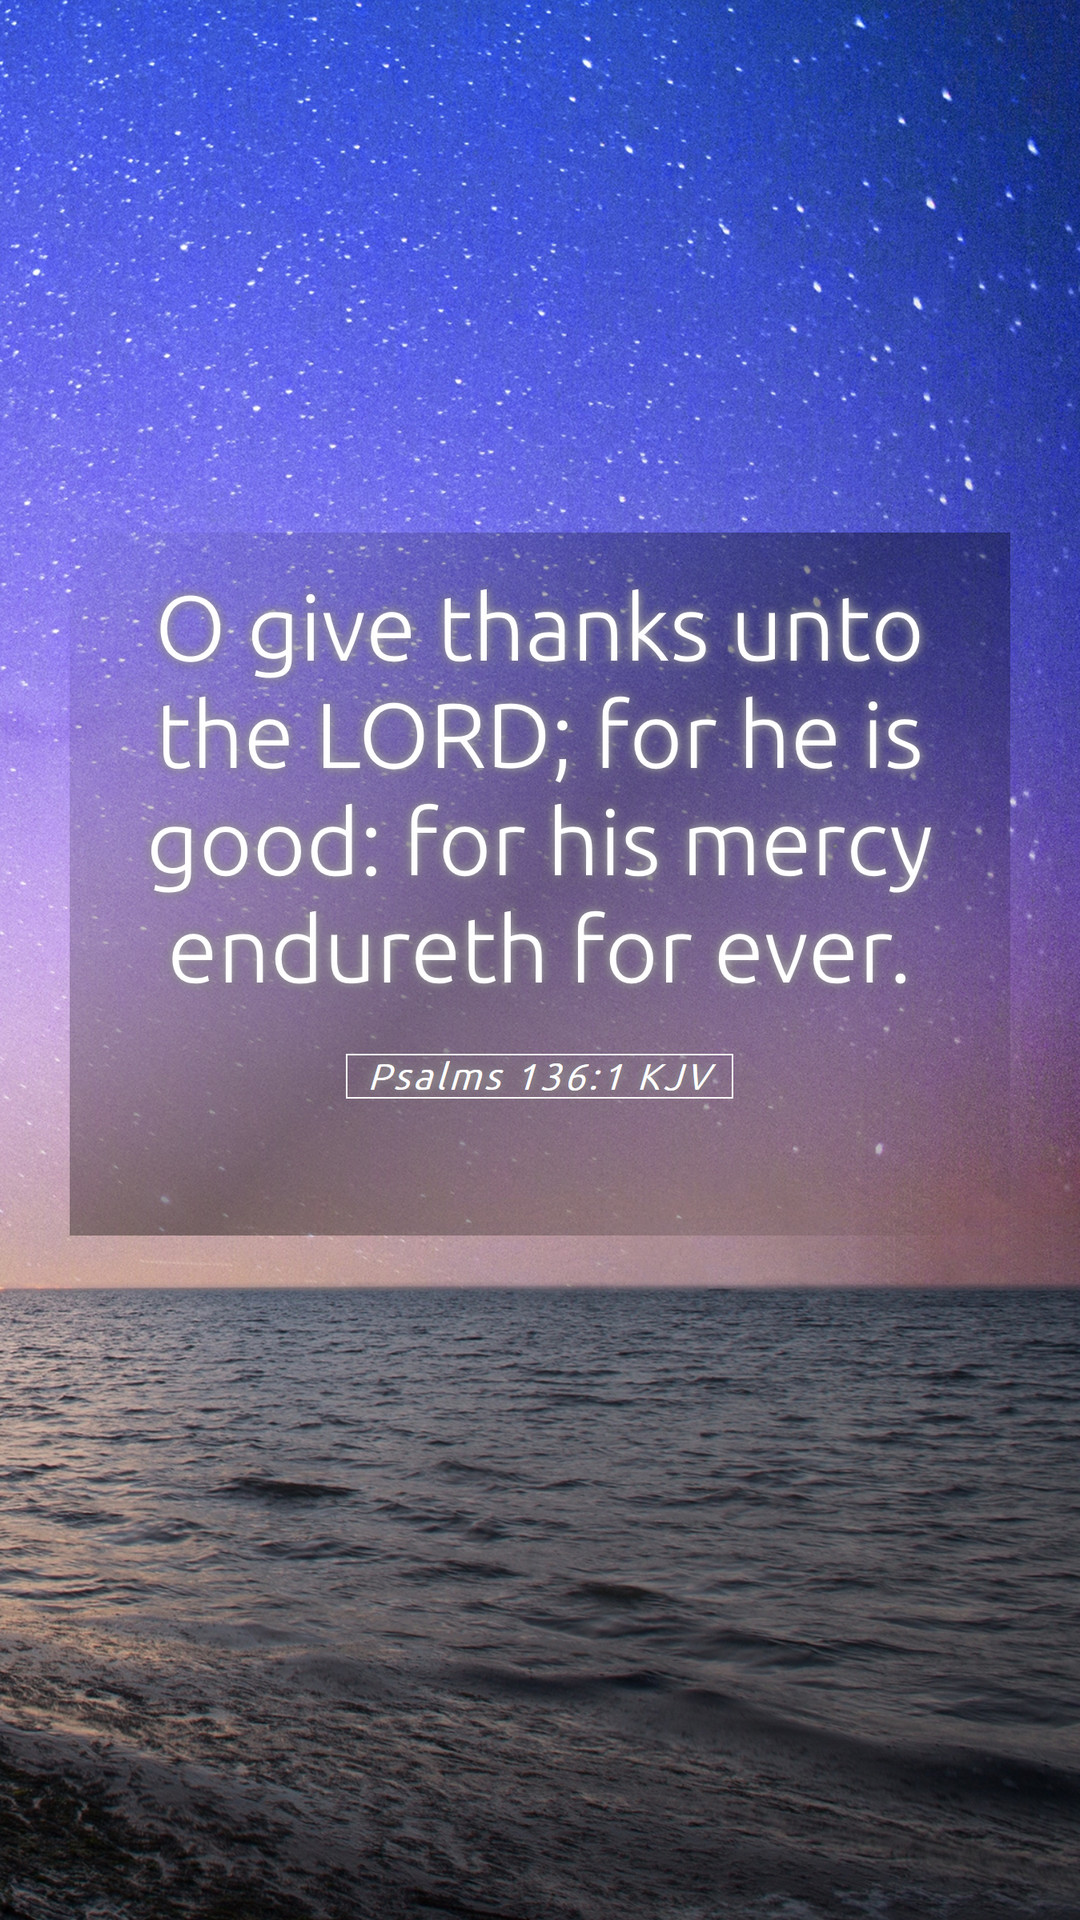 Psalms 136:1 KJV Mobile Phone Wallpaper give thanks unto the LORD; for he is good: for